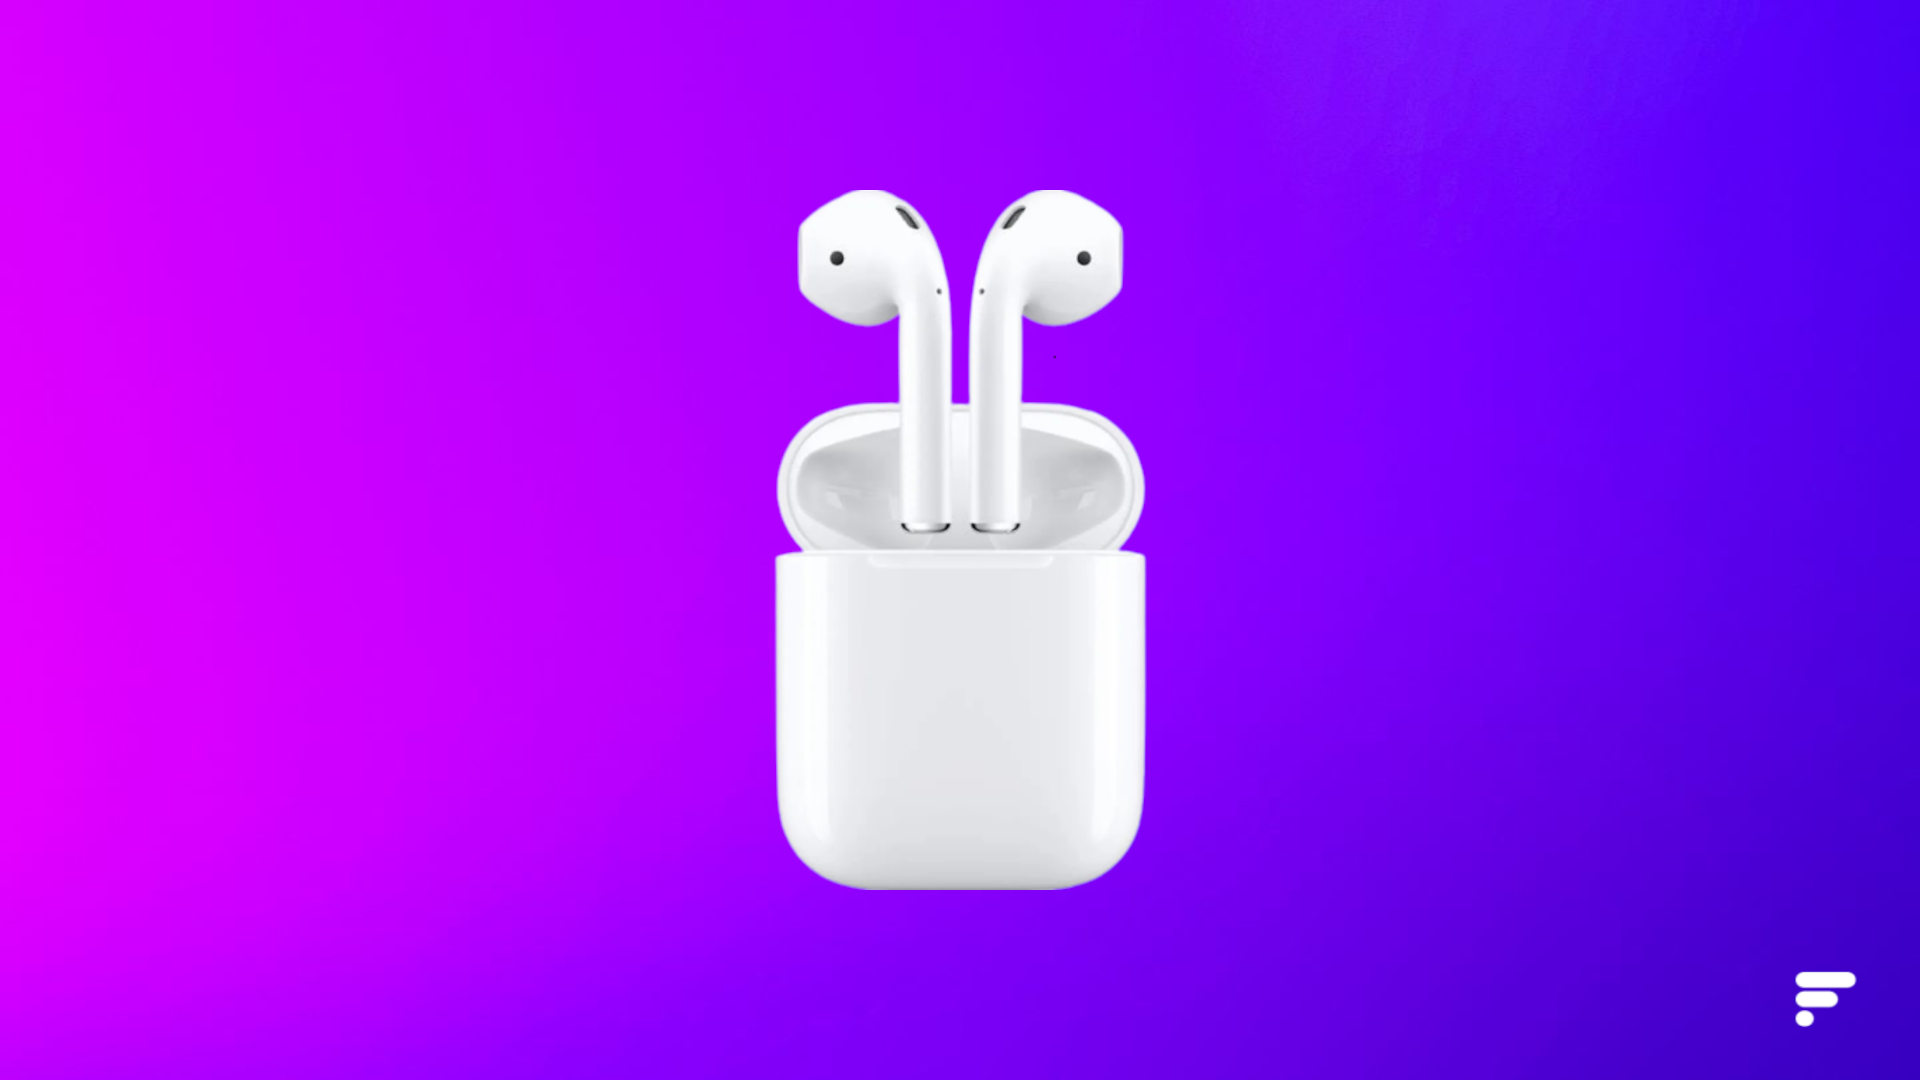 Airpods mv7n2 цены. AIRPODS Pro 2. Наушники AIRPODS PLAYSTATION. Аирподс 4. AIRPODS Black.